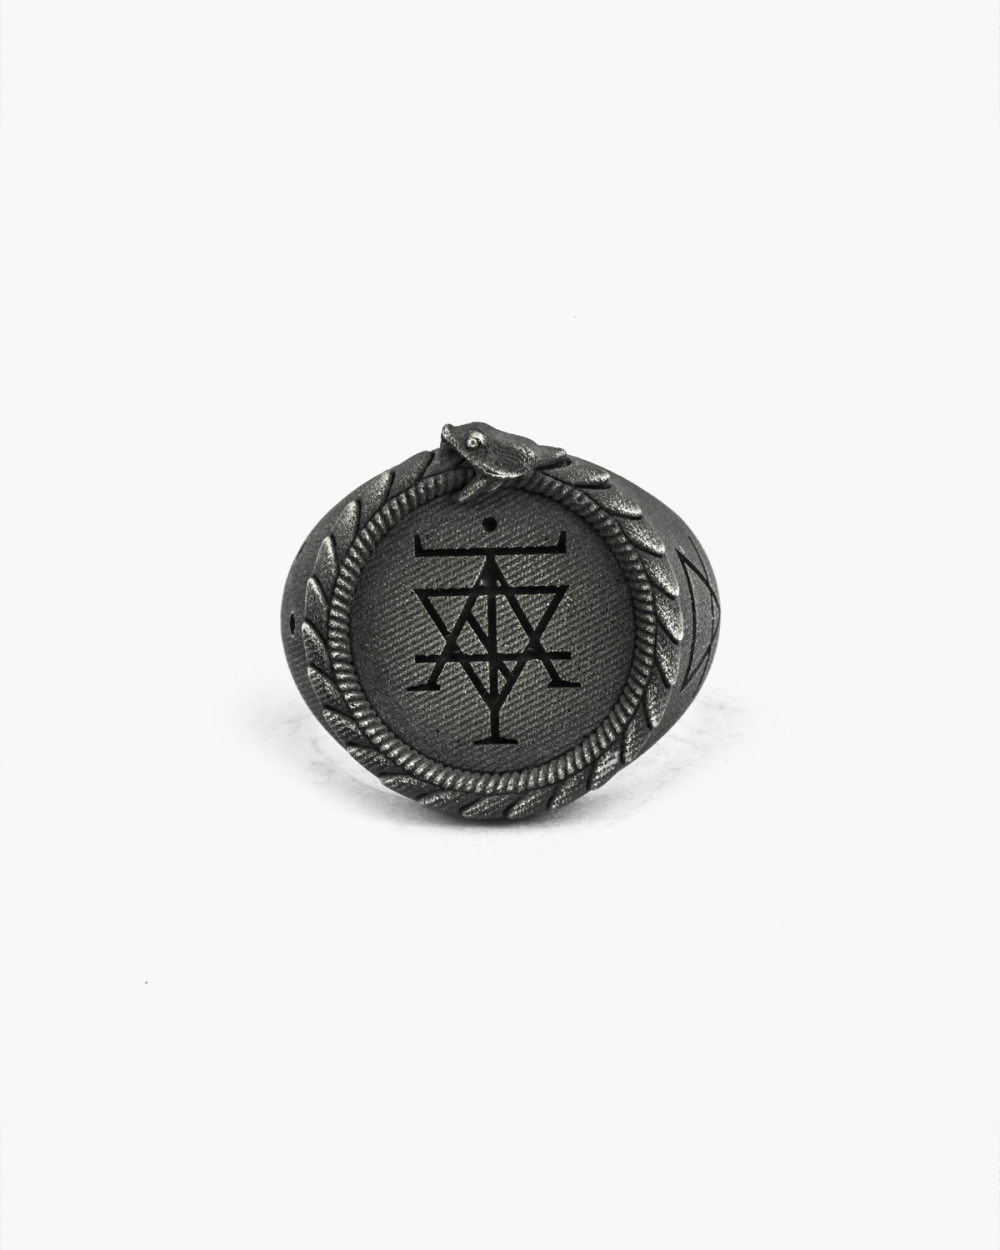 ZODIAC SINGS OPHIS SIGNET RING